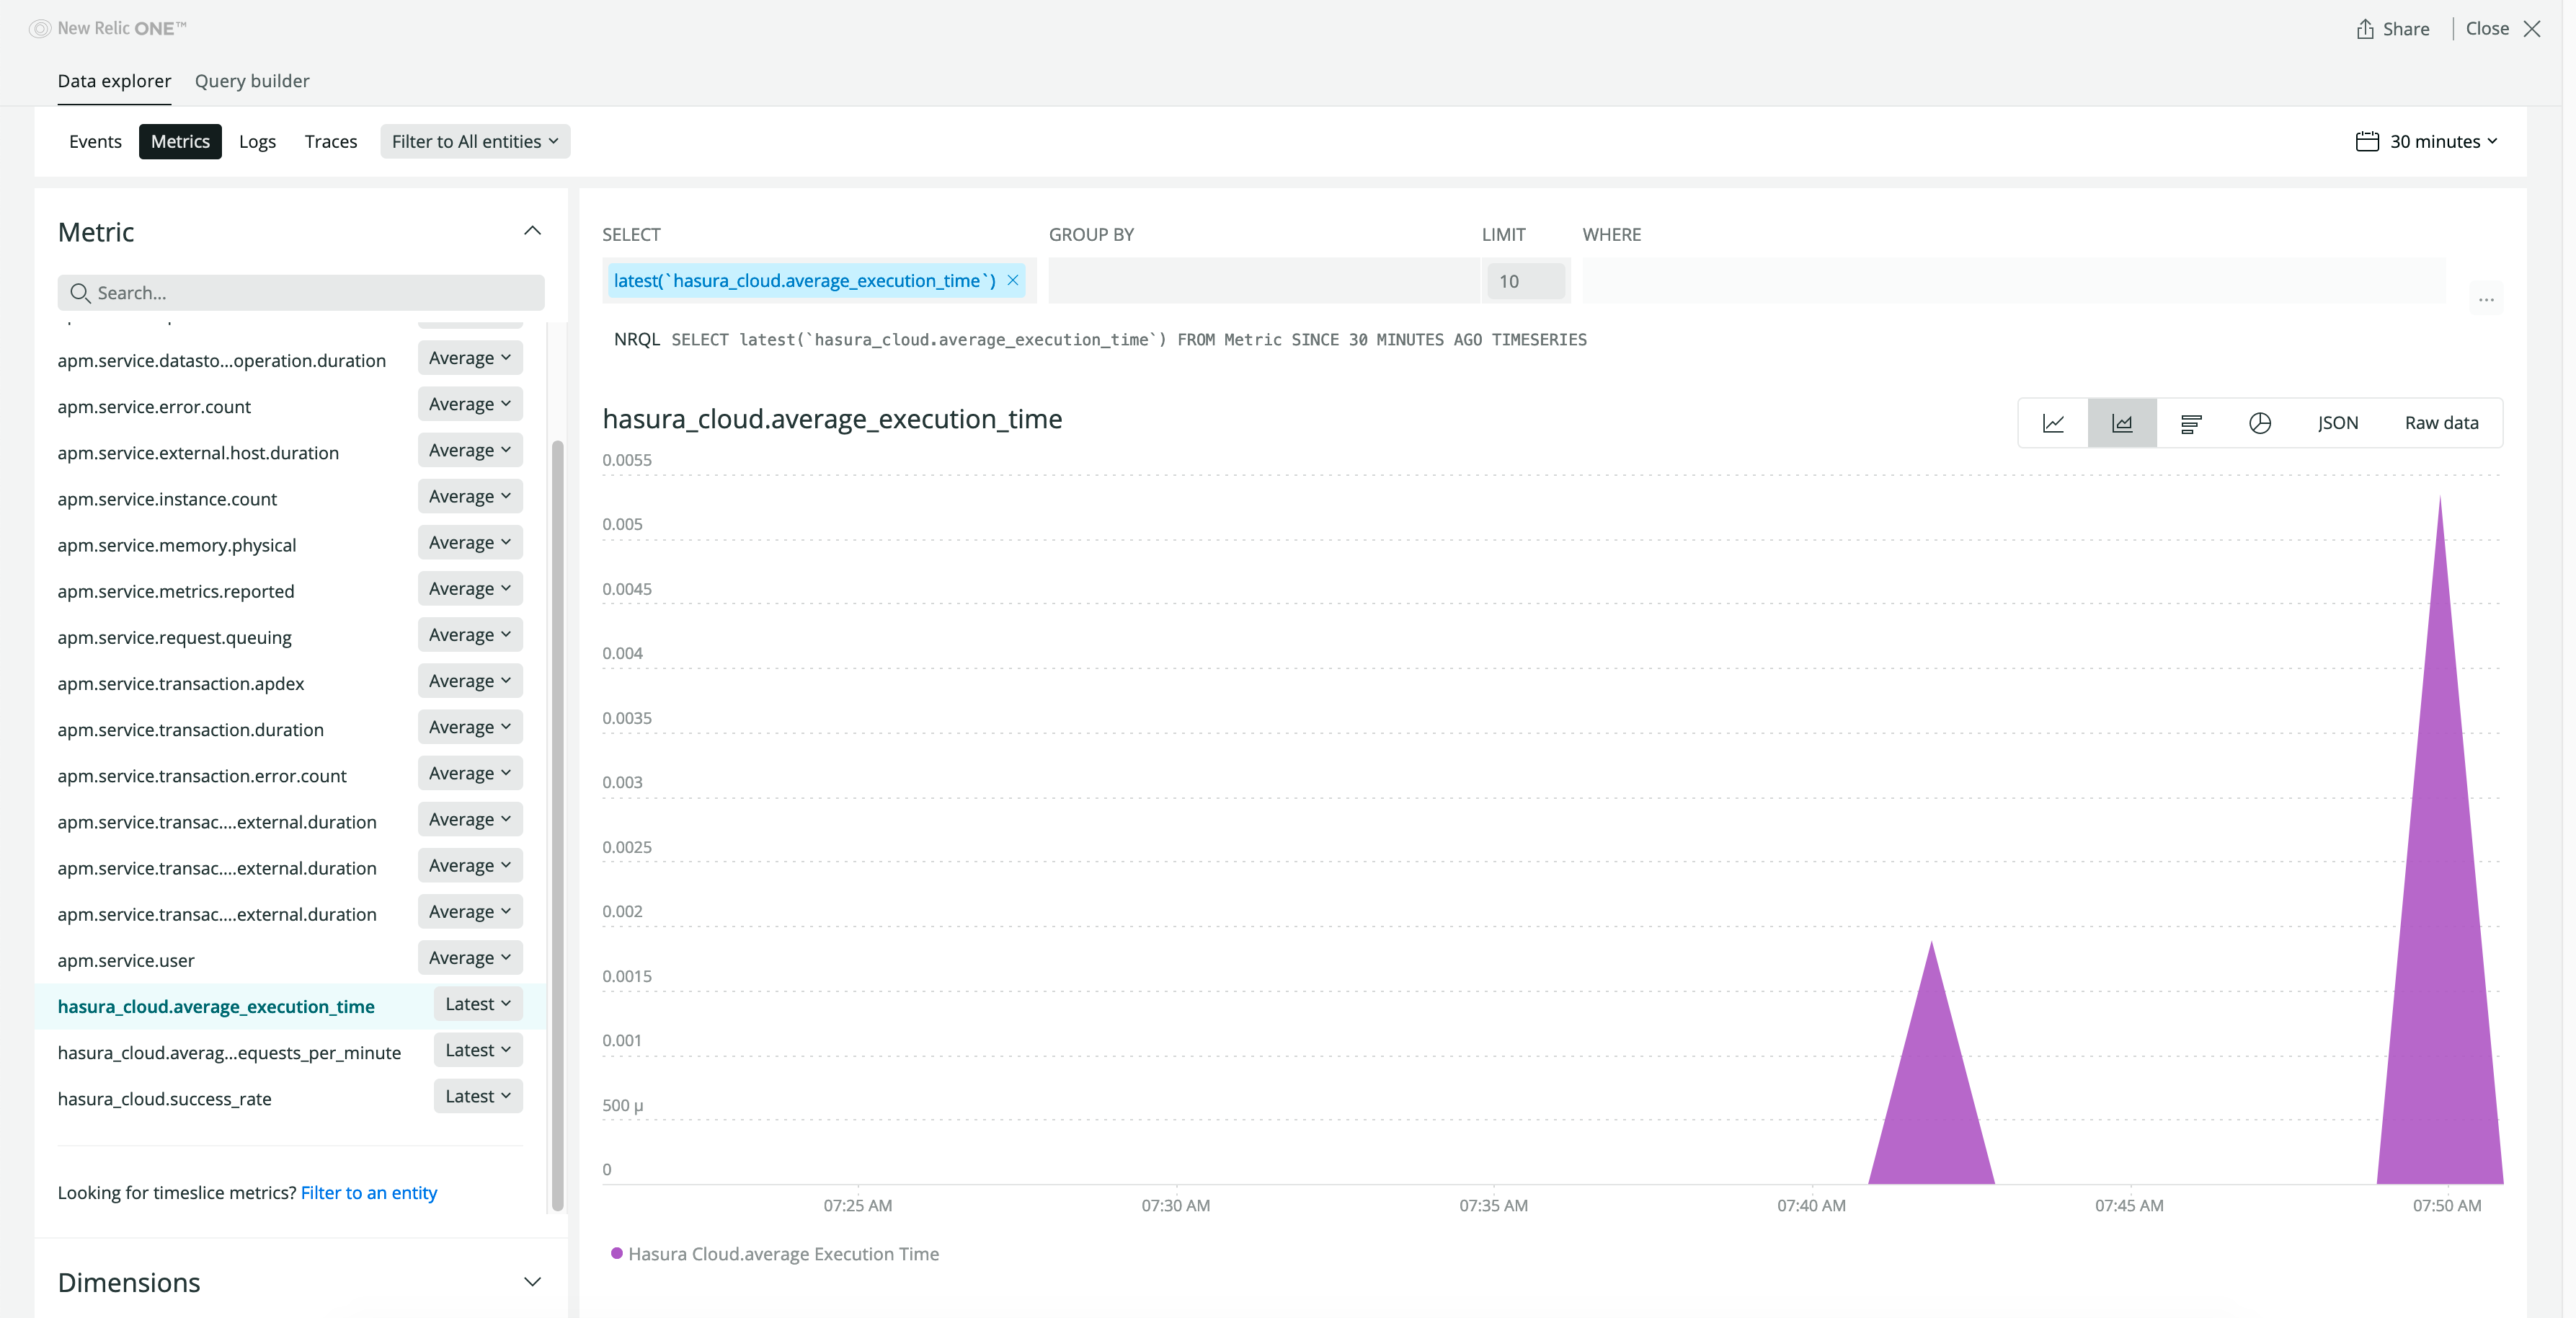 Metrics successfully exported to New Relic